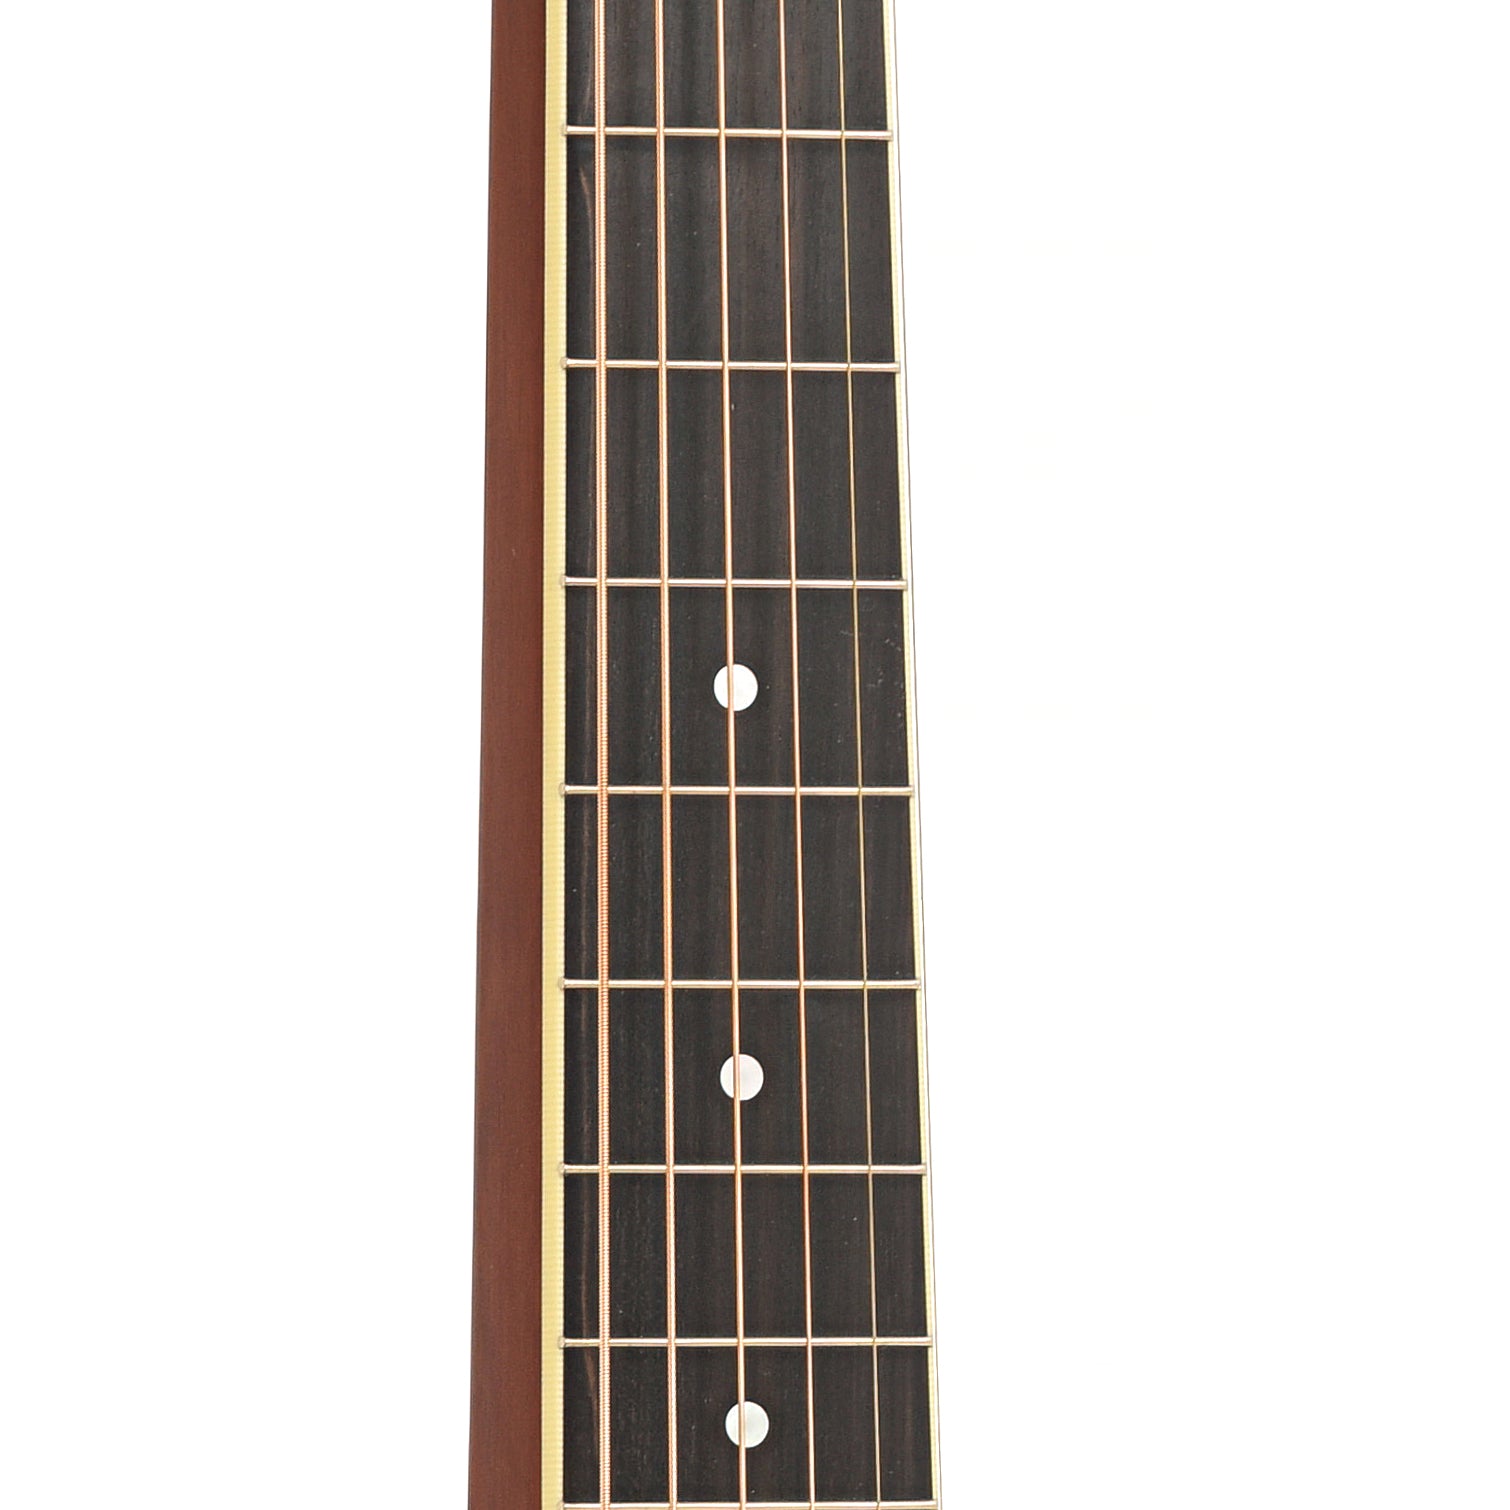 Fretboard of National Style 1 German Silver Squareneck Tricone 